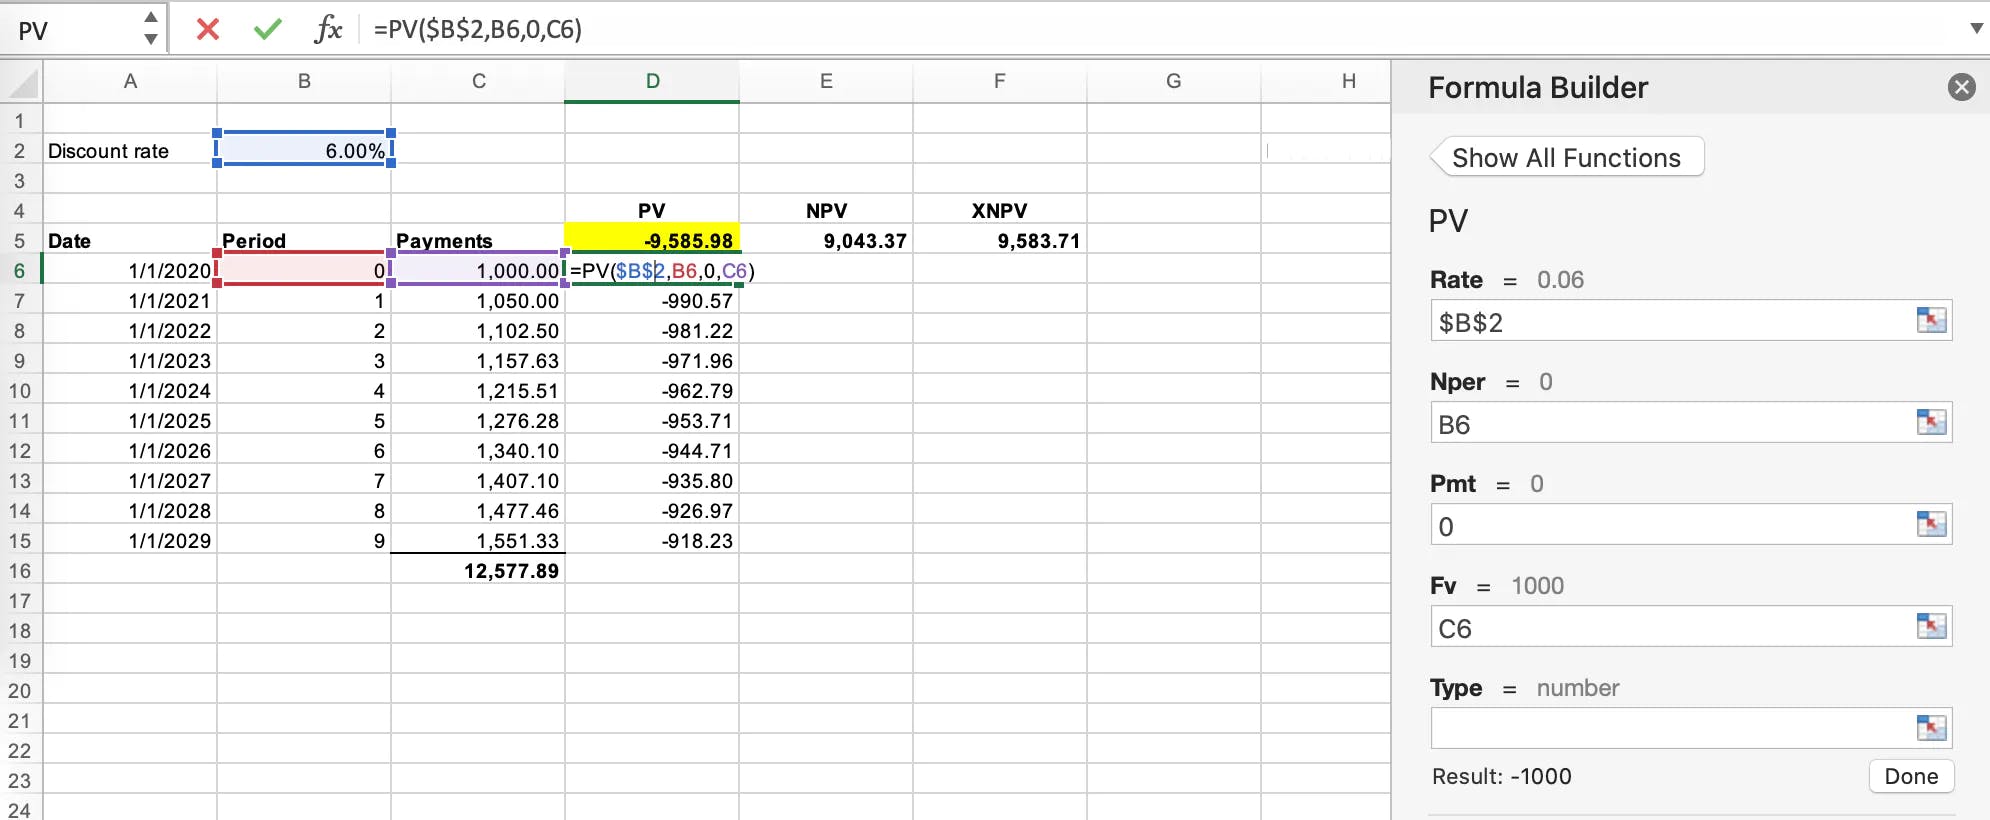 Application of the present value formula in Microsoft Excel